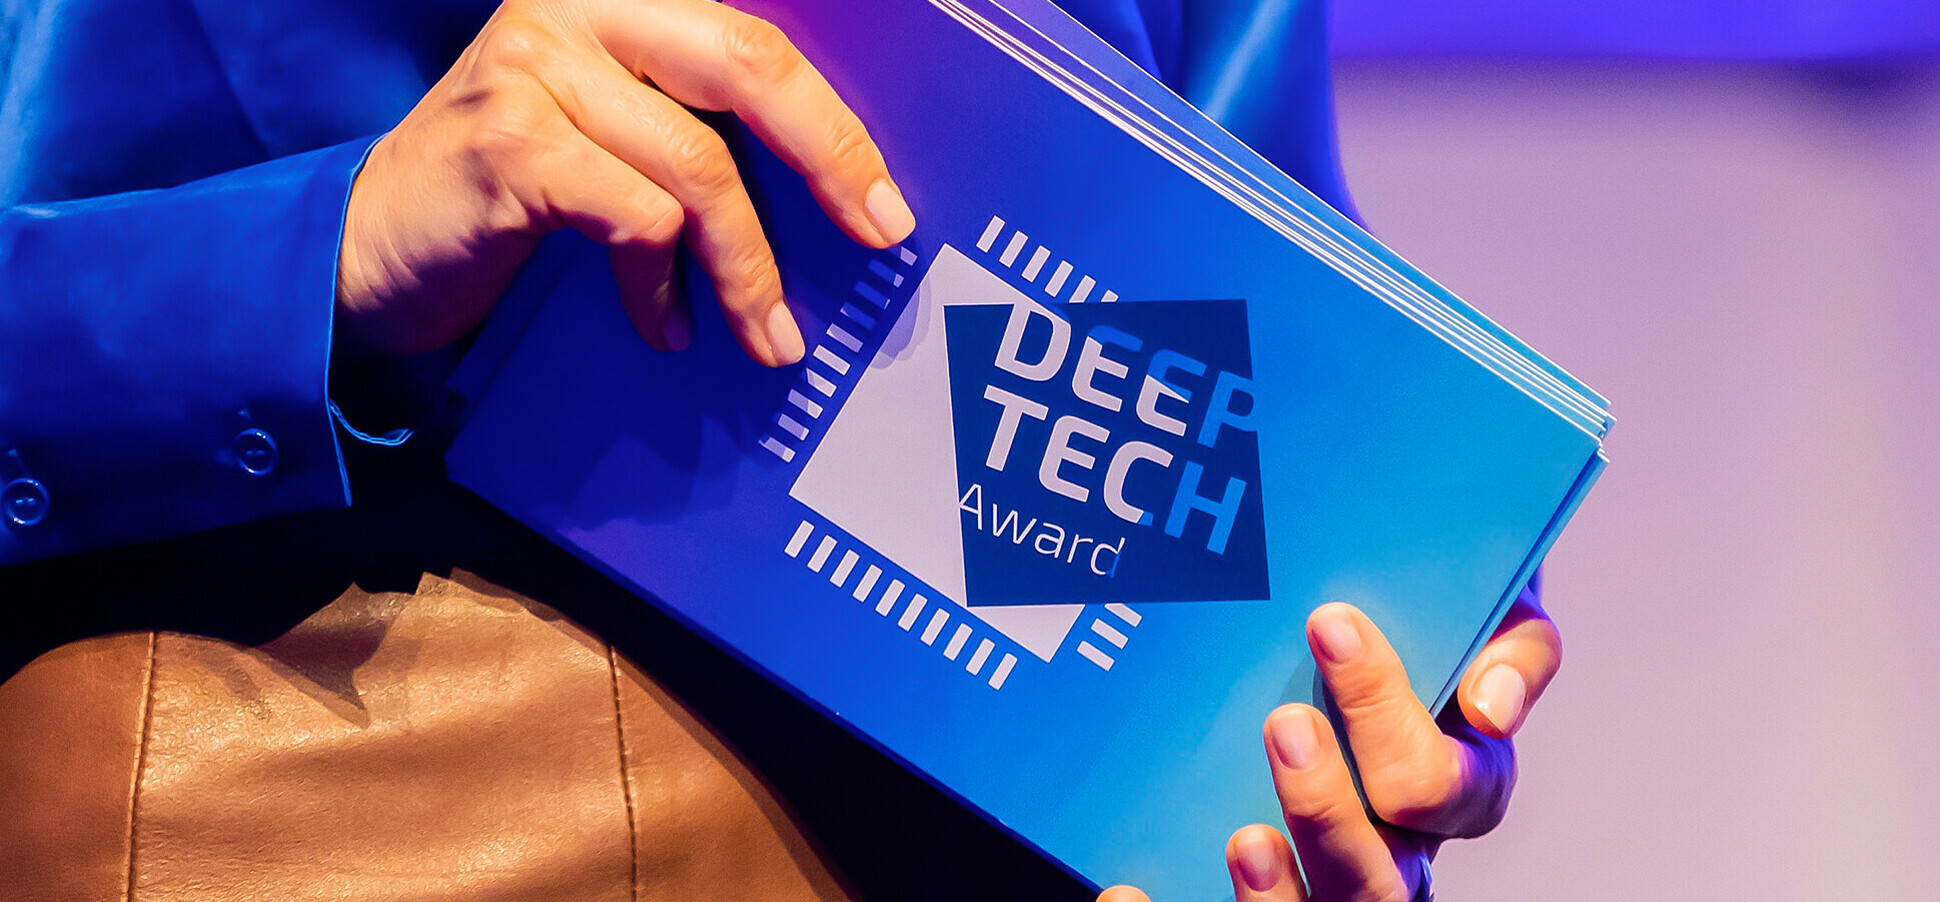 In July 2023 the 8th Deep Tech Awards ceremony took place in Berlin